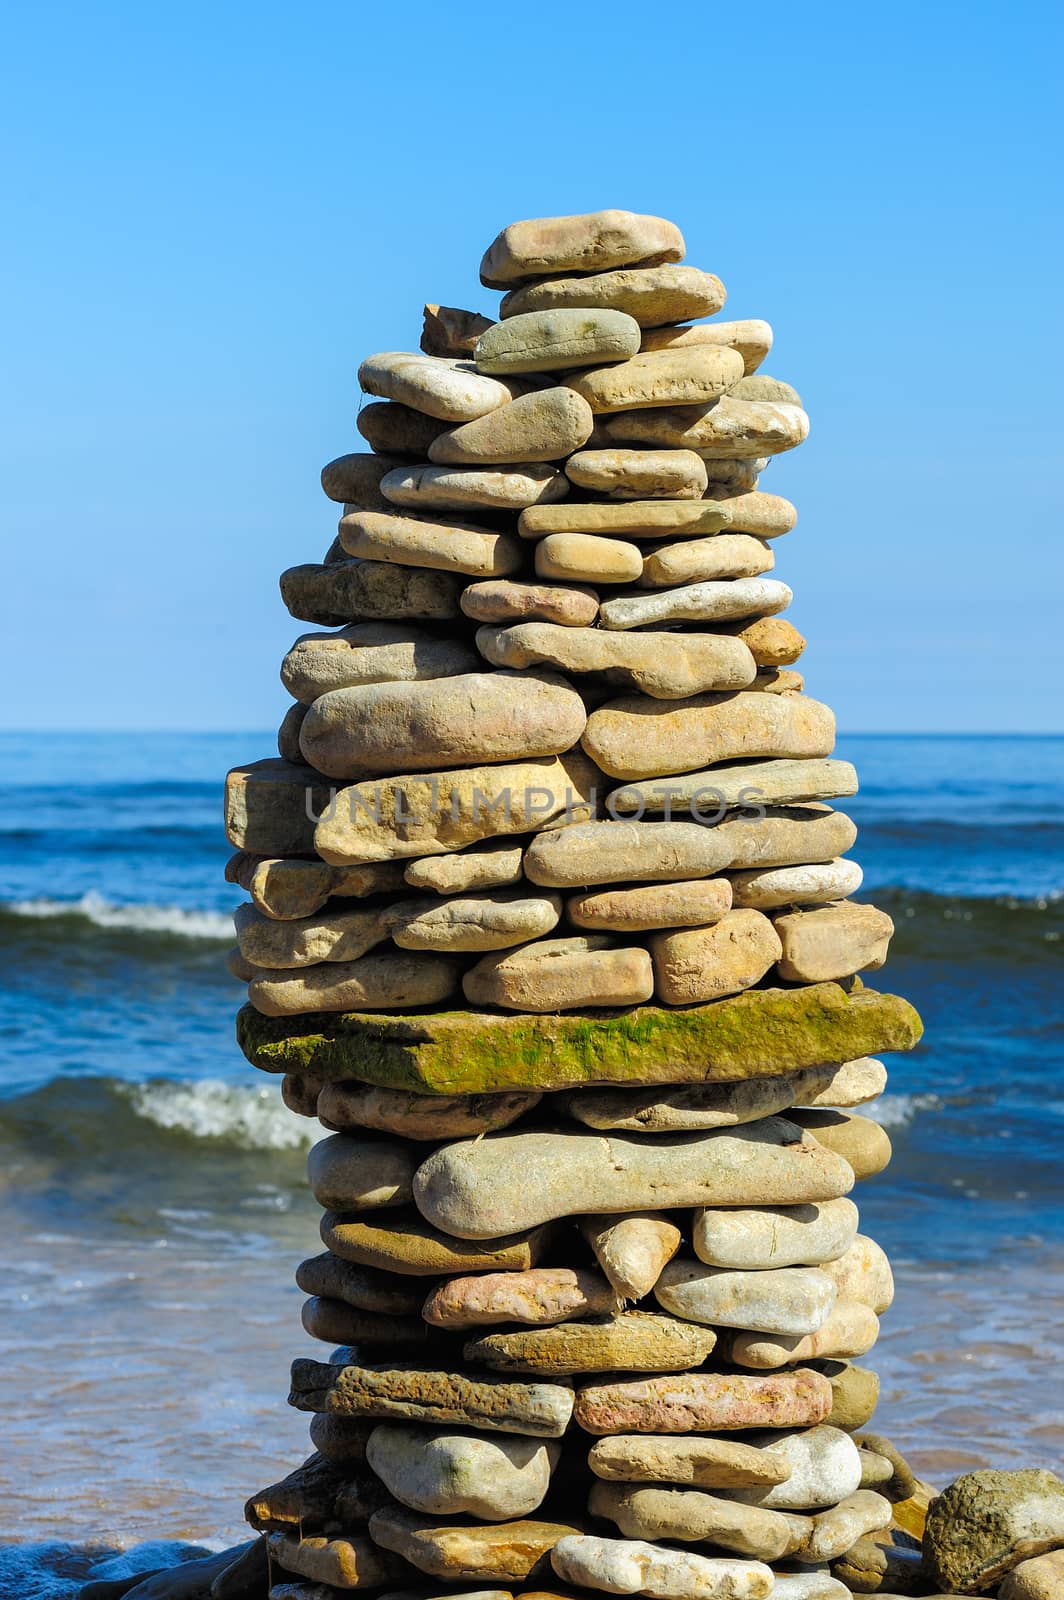 Stones laid out in the form of a tower on the coast